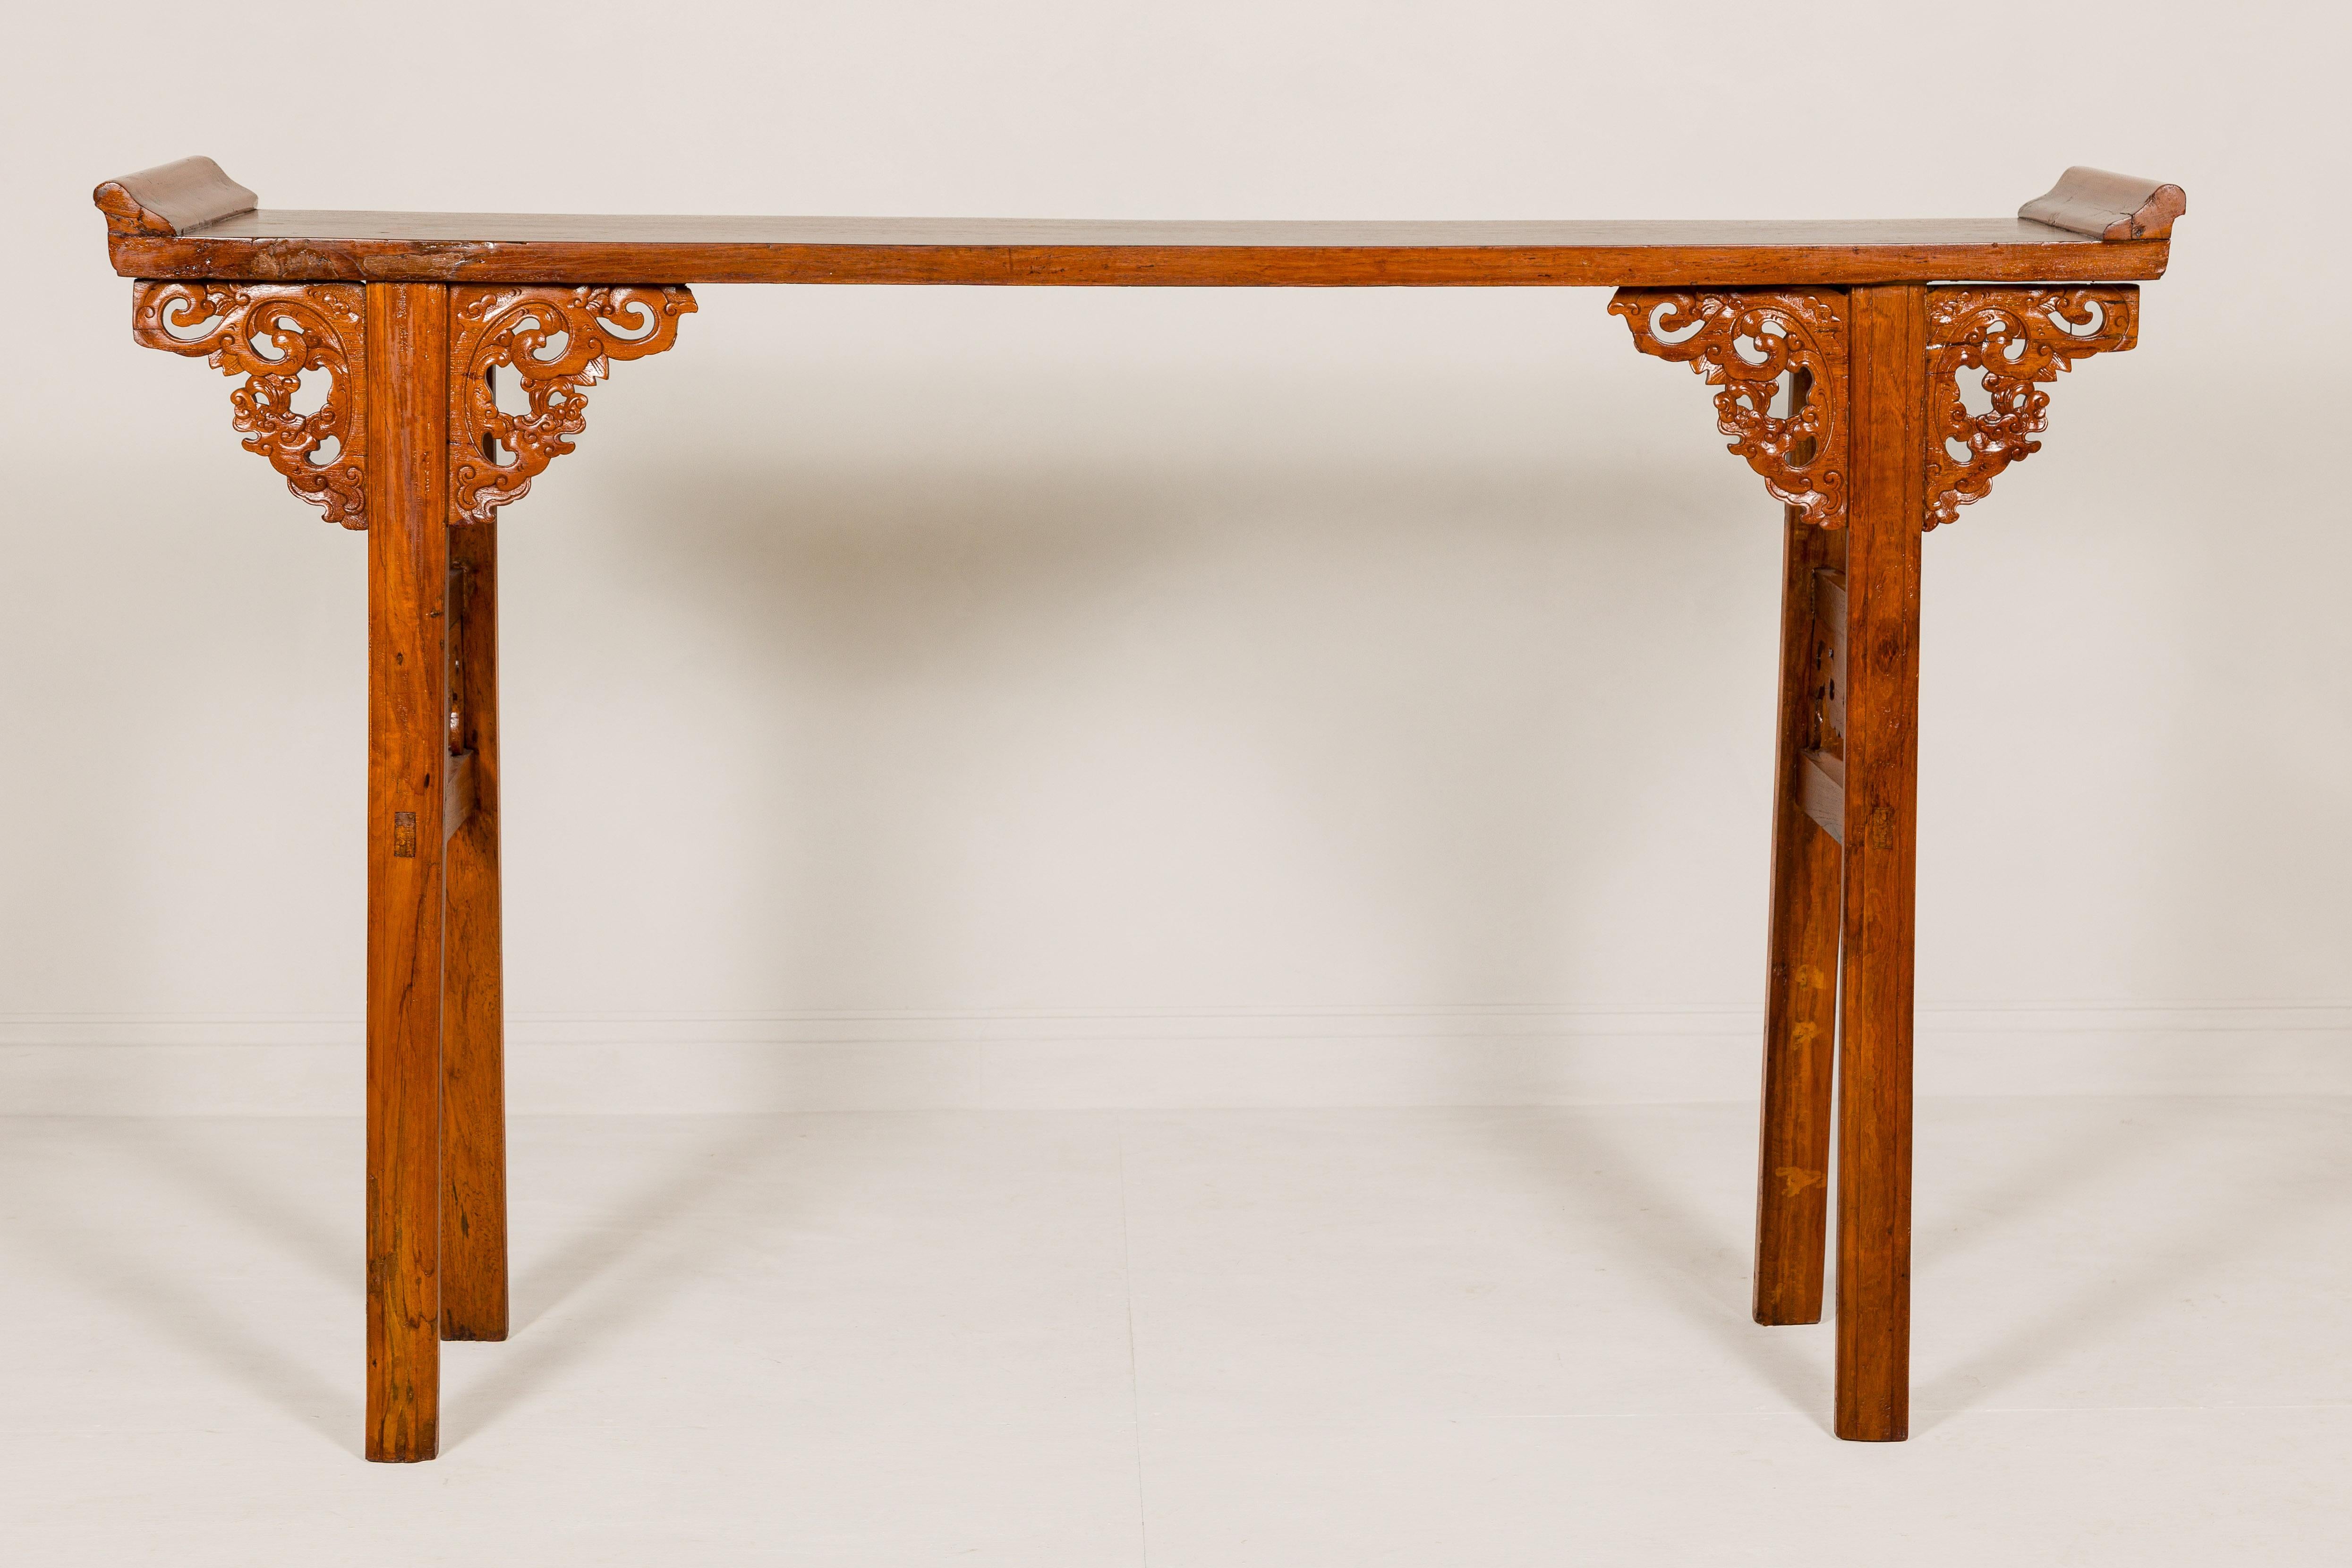 A Qing Dynasty period tall altar console table from the 19th century, with everted flanges, carved spandrels and double side supports. This magnificent Qing Dynasty period altar console table from the 19th century is a testament to the exquisite